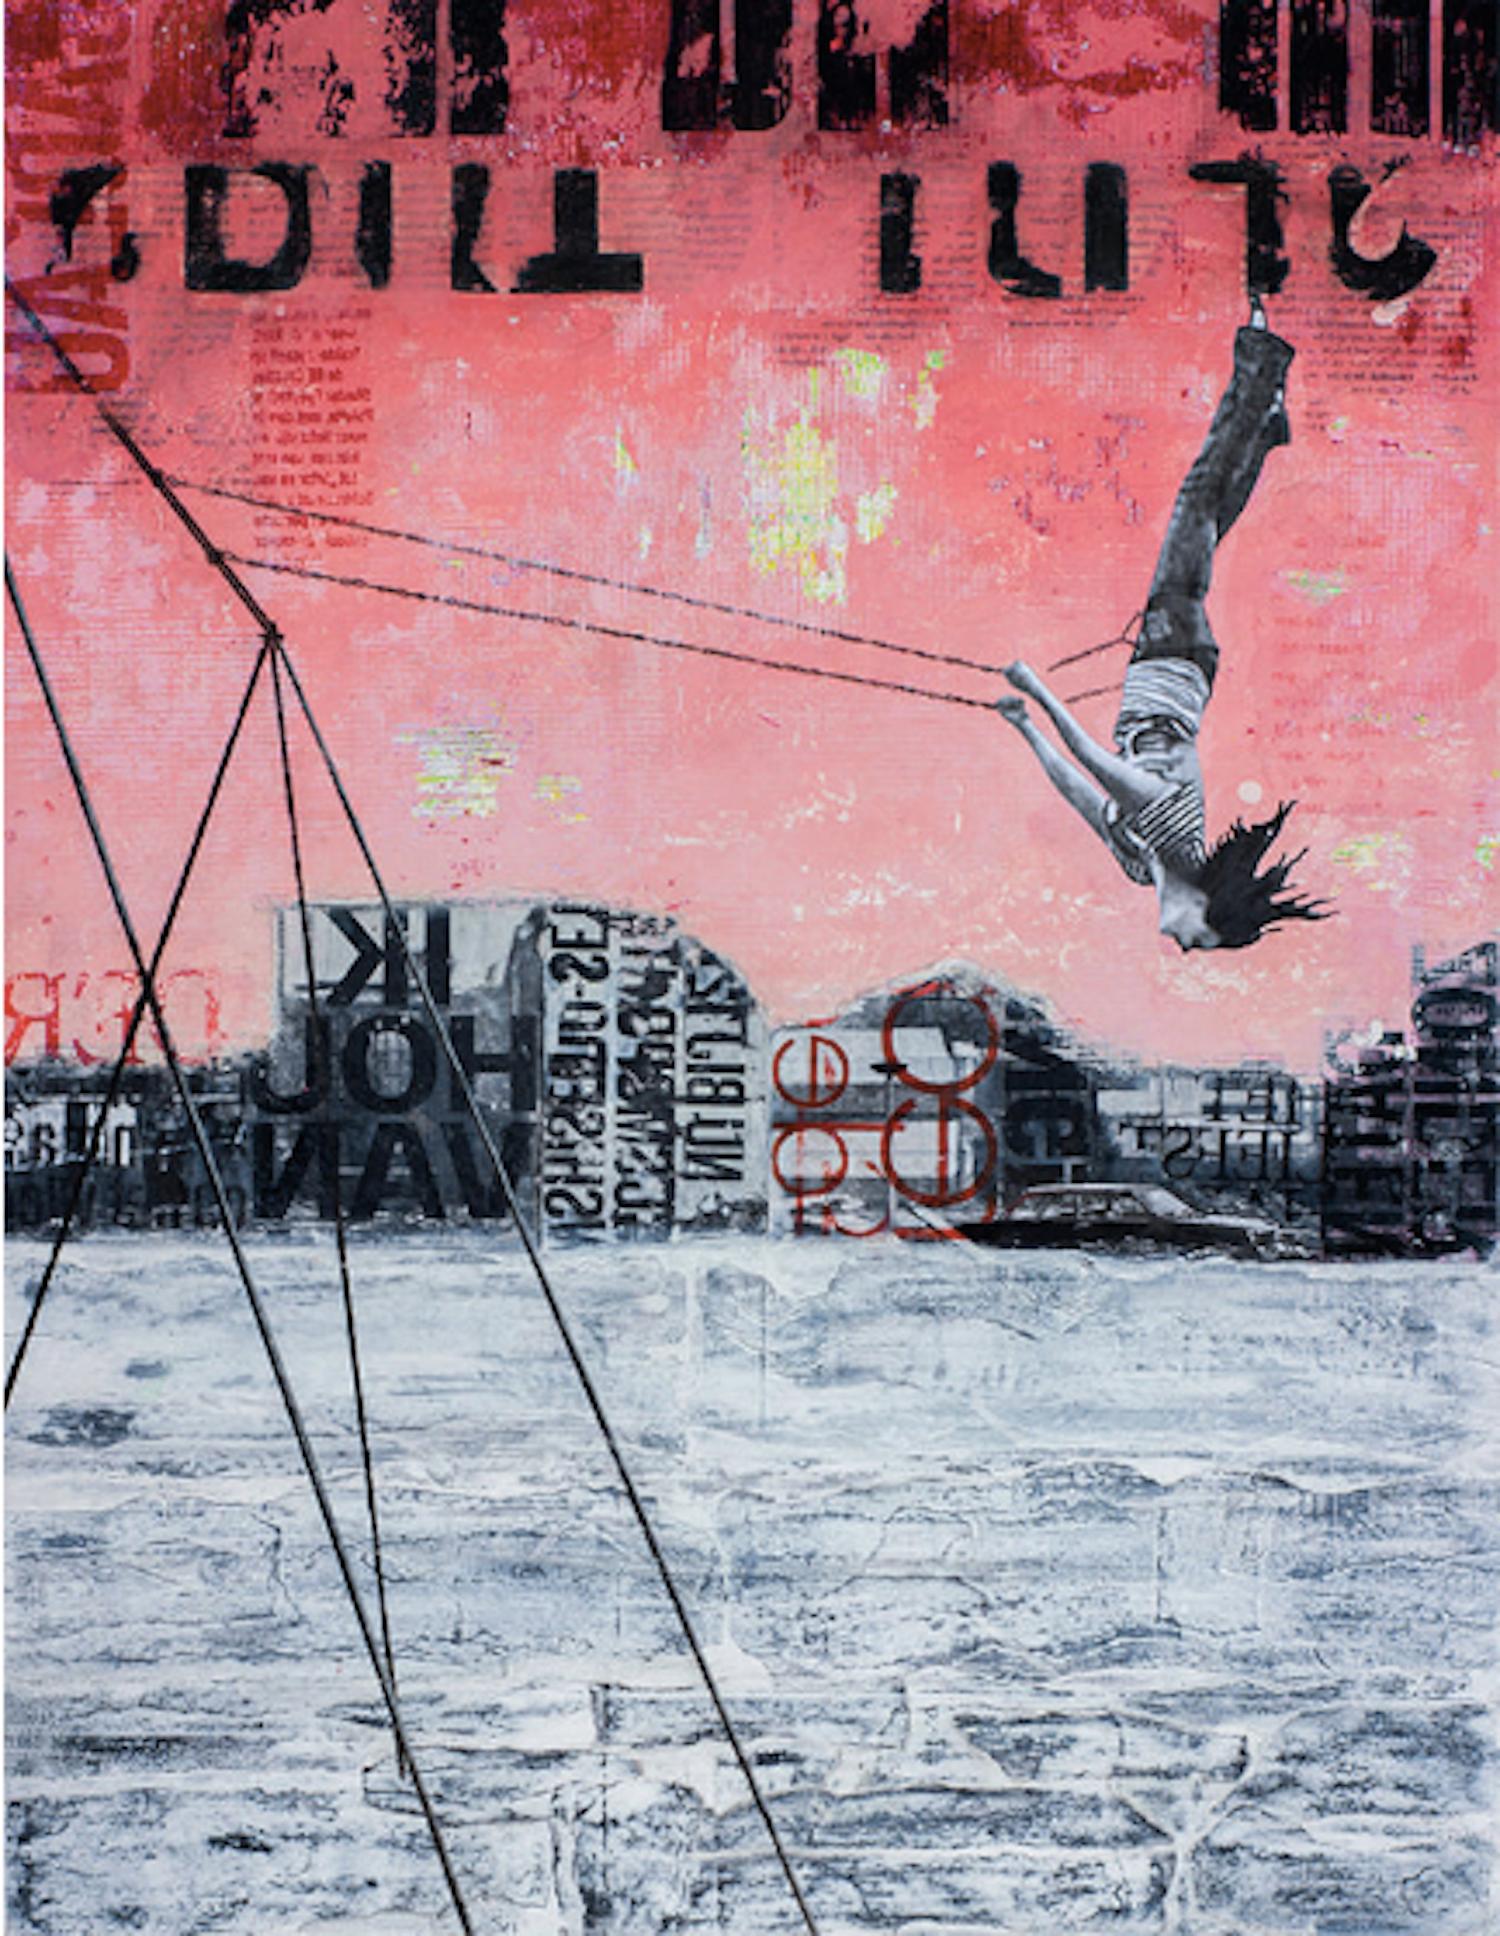 Deb Waterman Figurative Painting - Friday Swing - street art urban landscape grey and red painting on paper